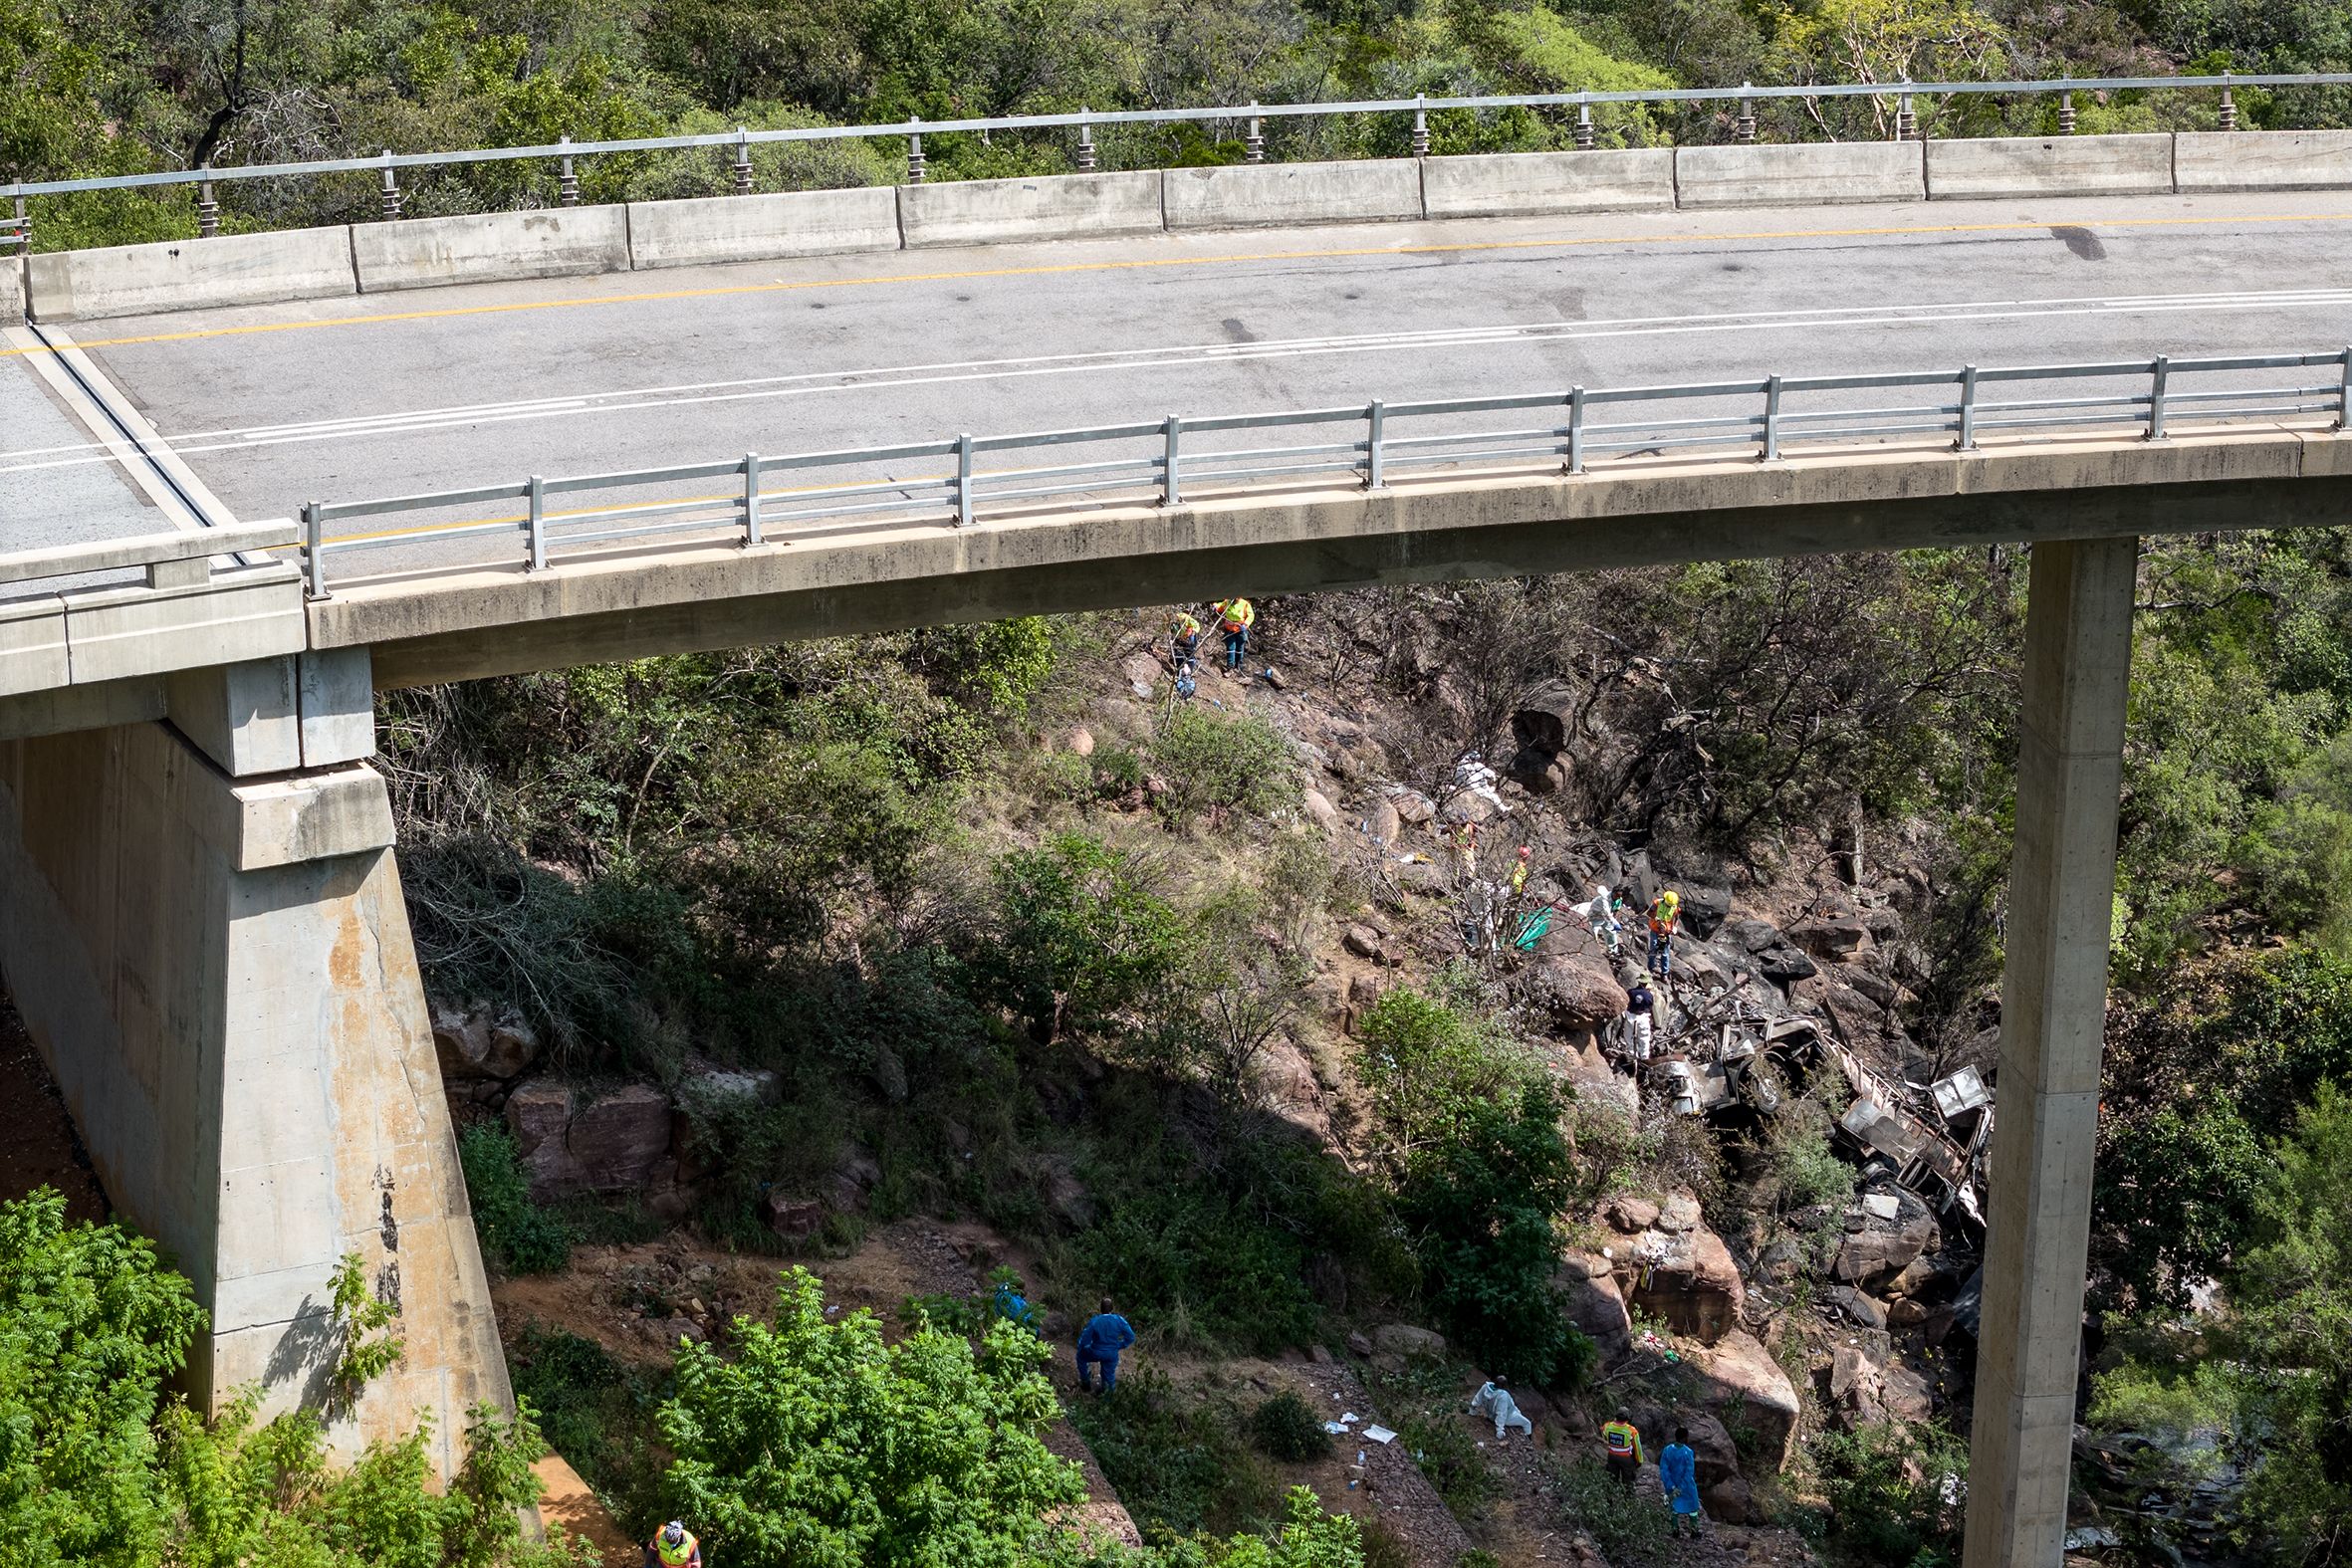 A drone picture shows rescuers working at the site of the bus crash near Mamatlakala in Limpopo province, South Africa